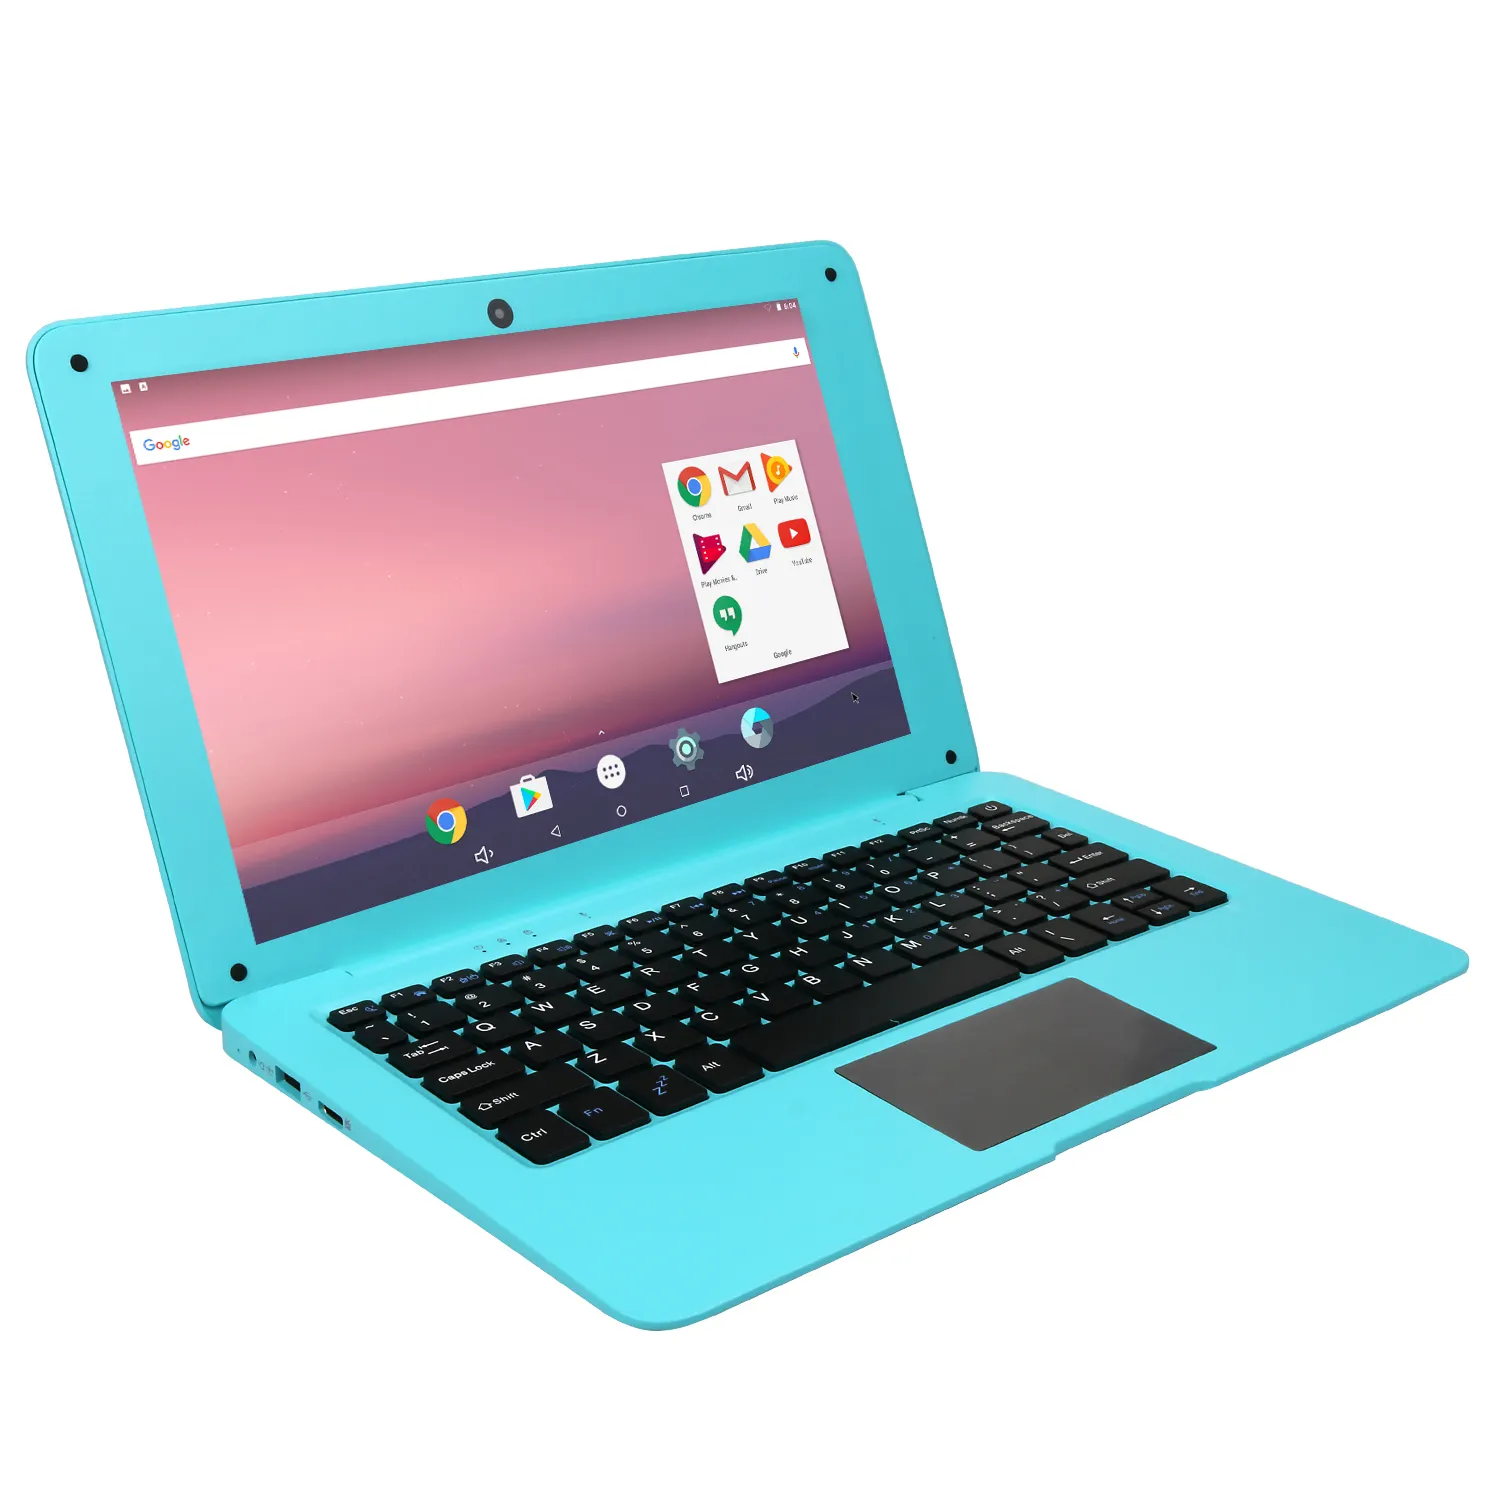 High Quality Low Price Kids Gaming A64 Android Laptop 32GB Notebook